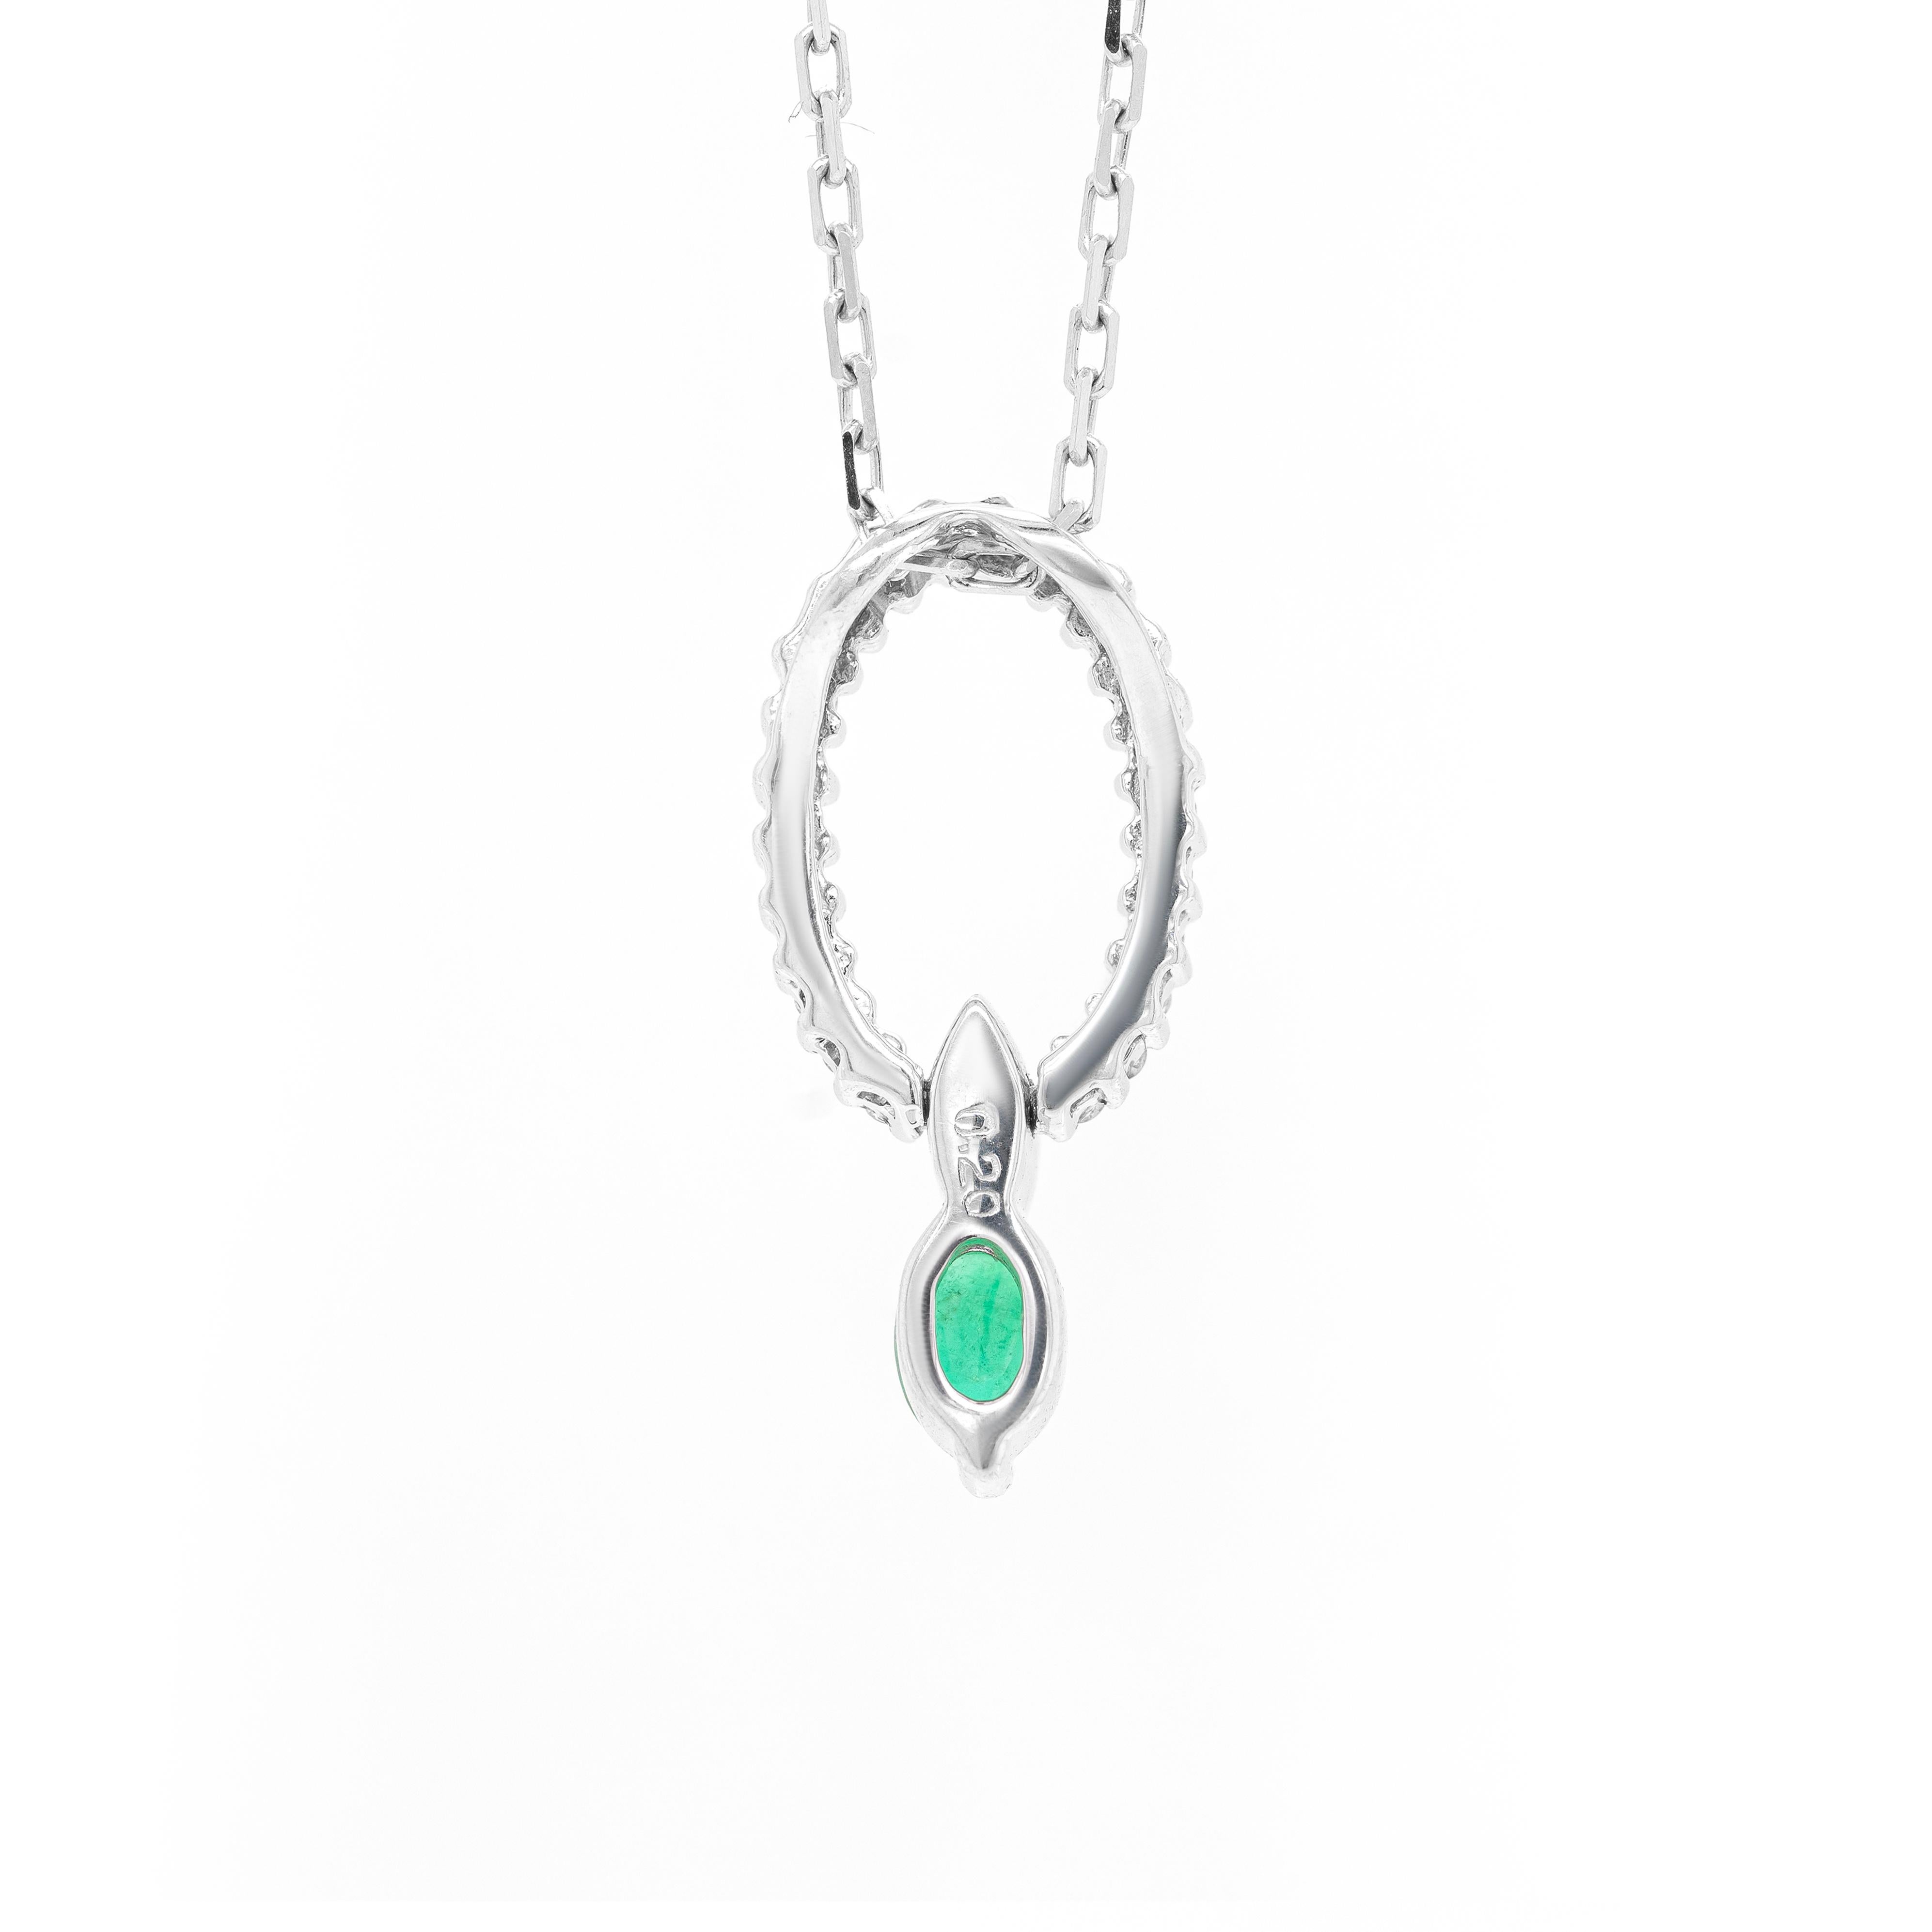 This delicate 18 carat white gold pendant is beautifully designed as an oval claw set with 23 fine quality round brilliant cut diamonds weighing 0.20ct in total. A vibrant oval shaped emerald weighing approximately 0.30ct suspends from the diamond